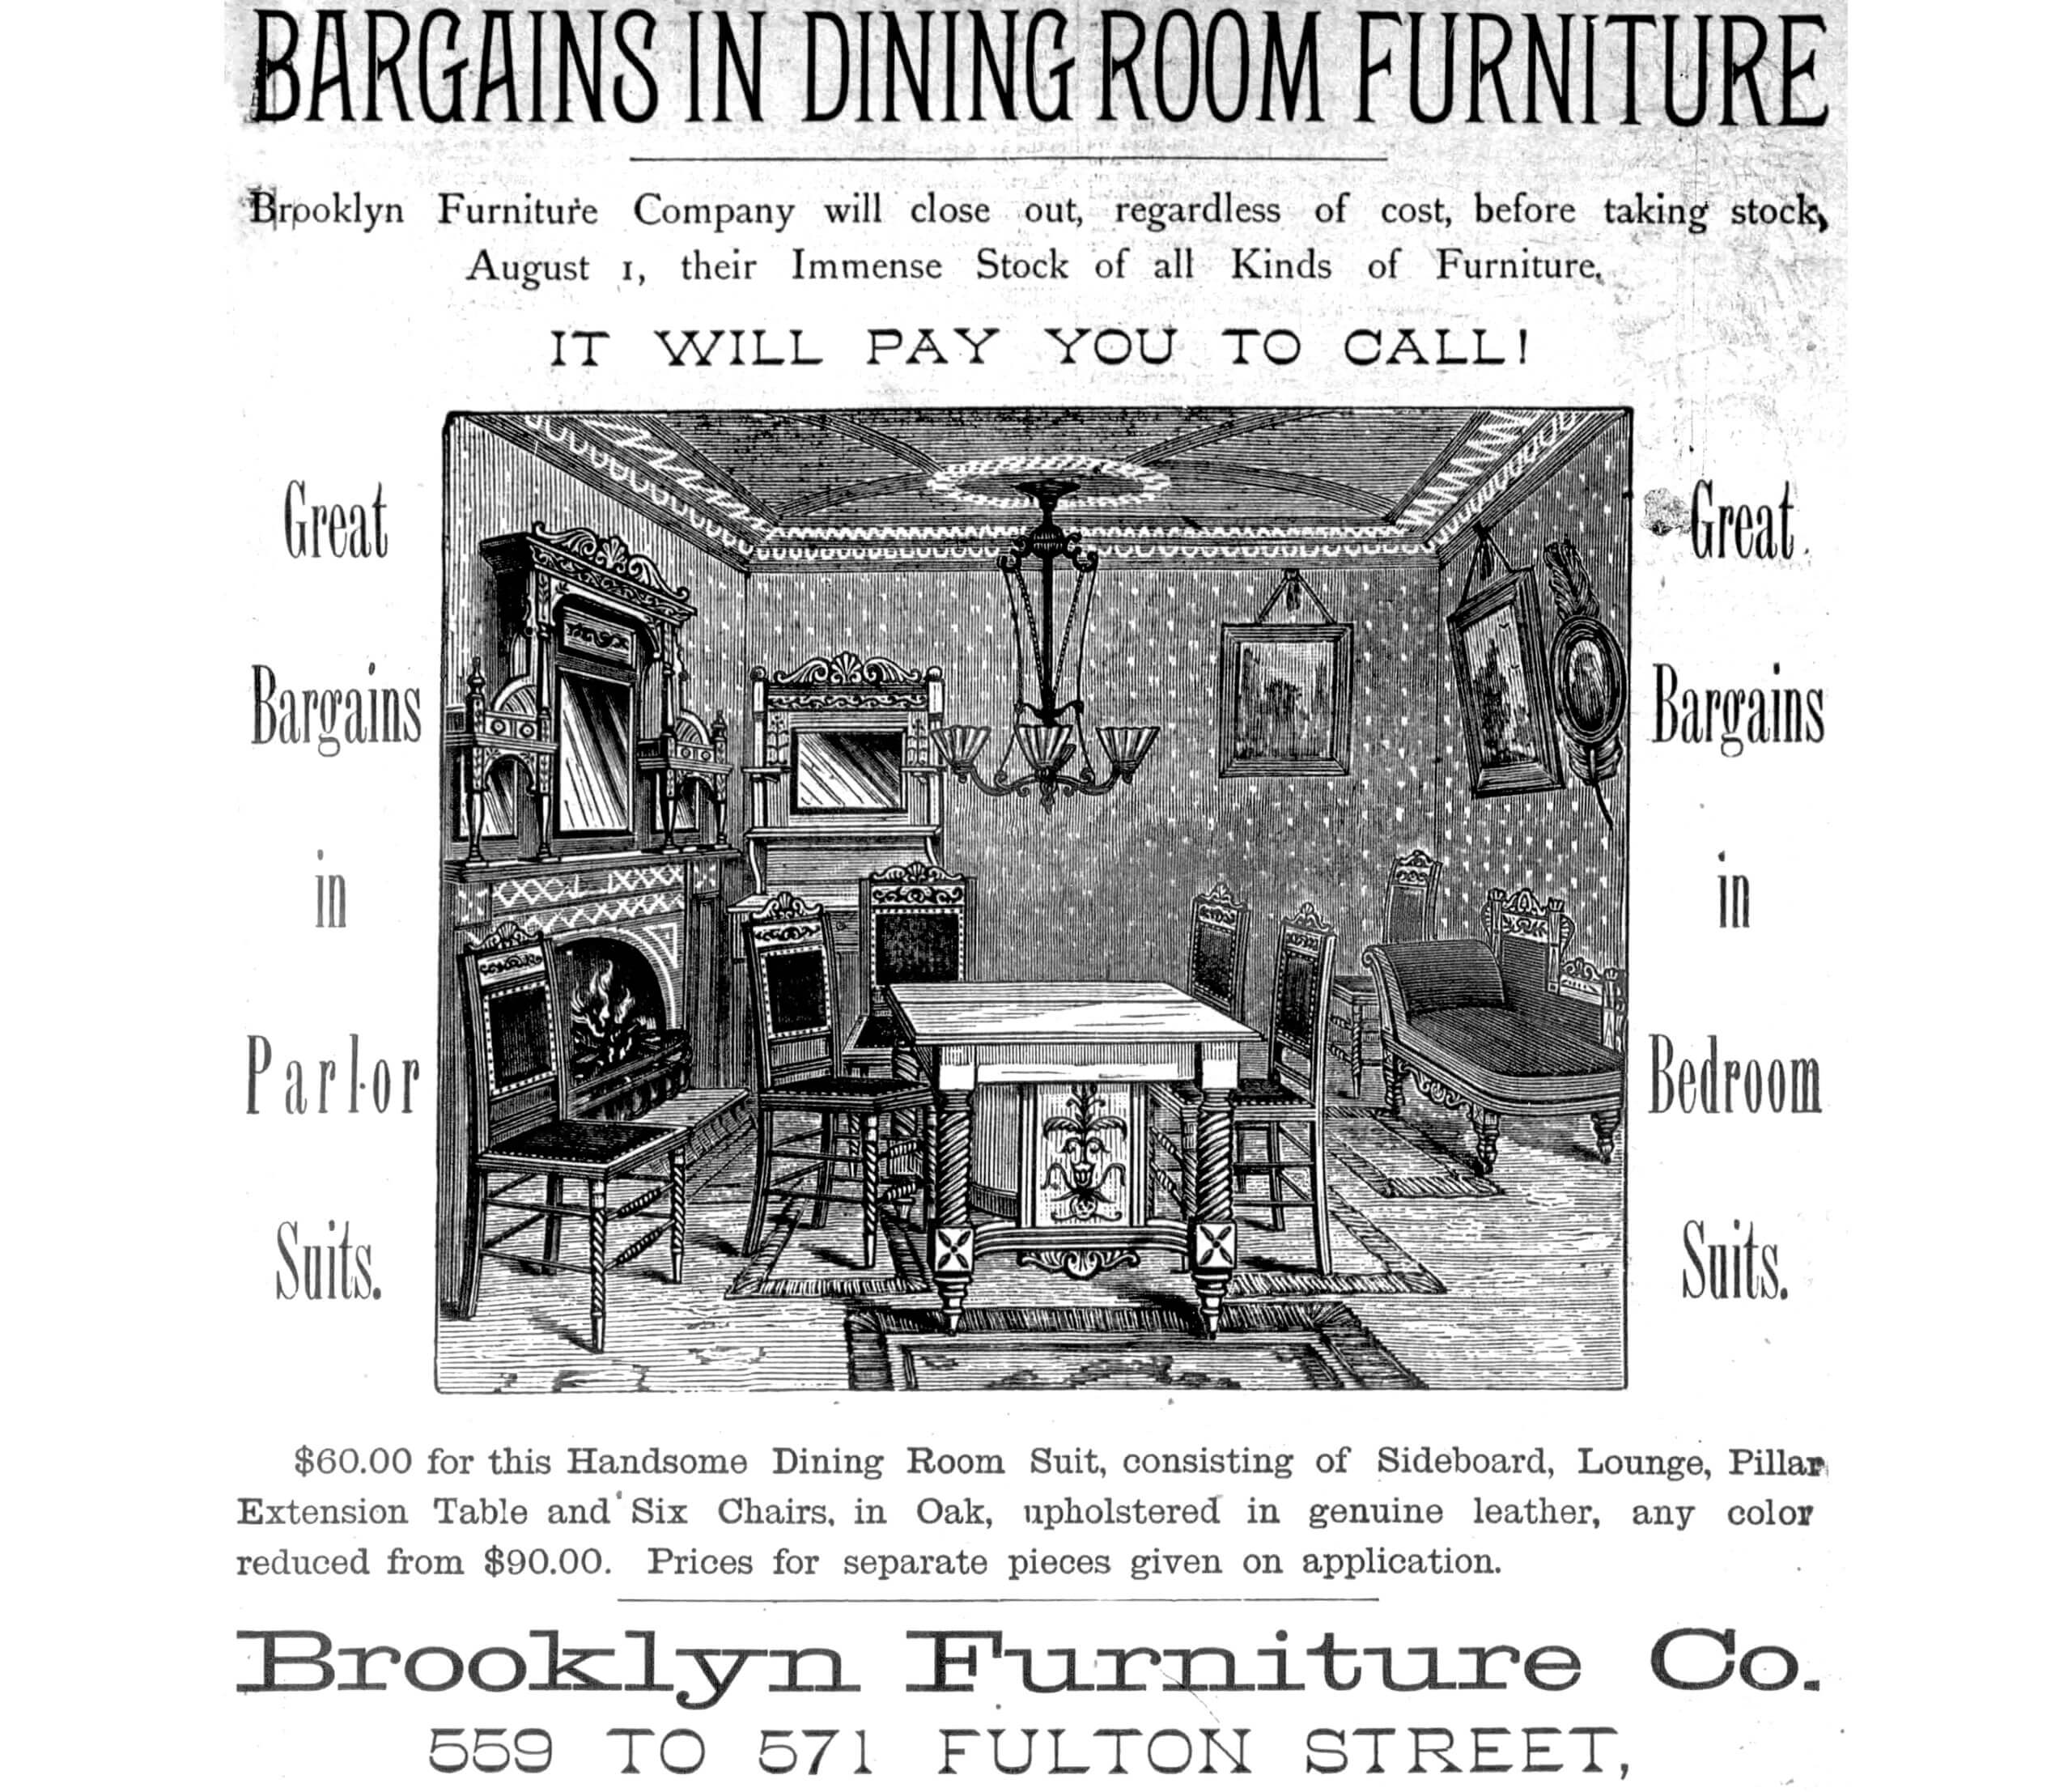 ad for dining room furniture that includes a sketch of a room with a mantel